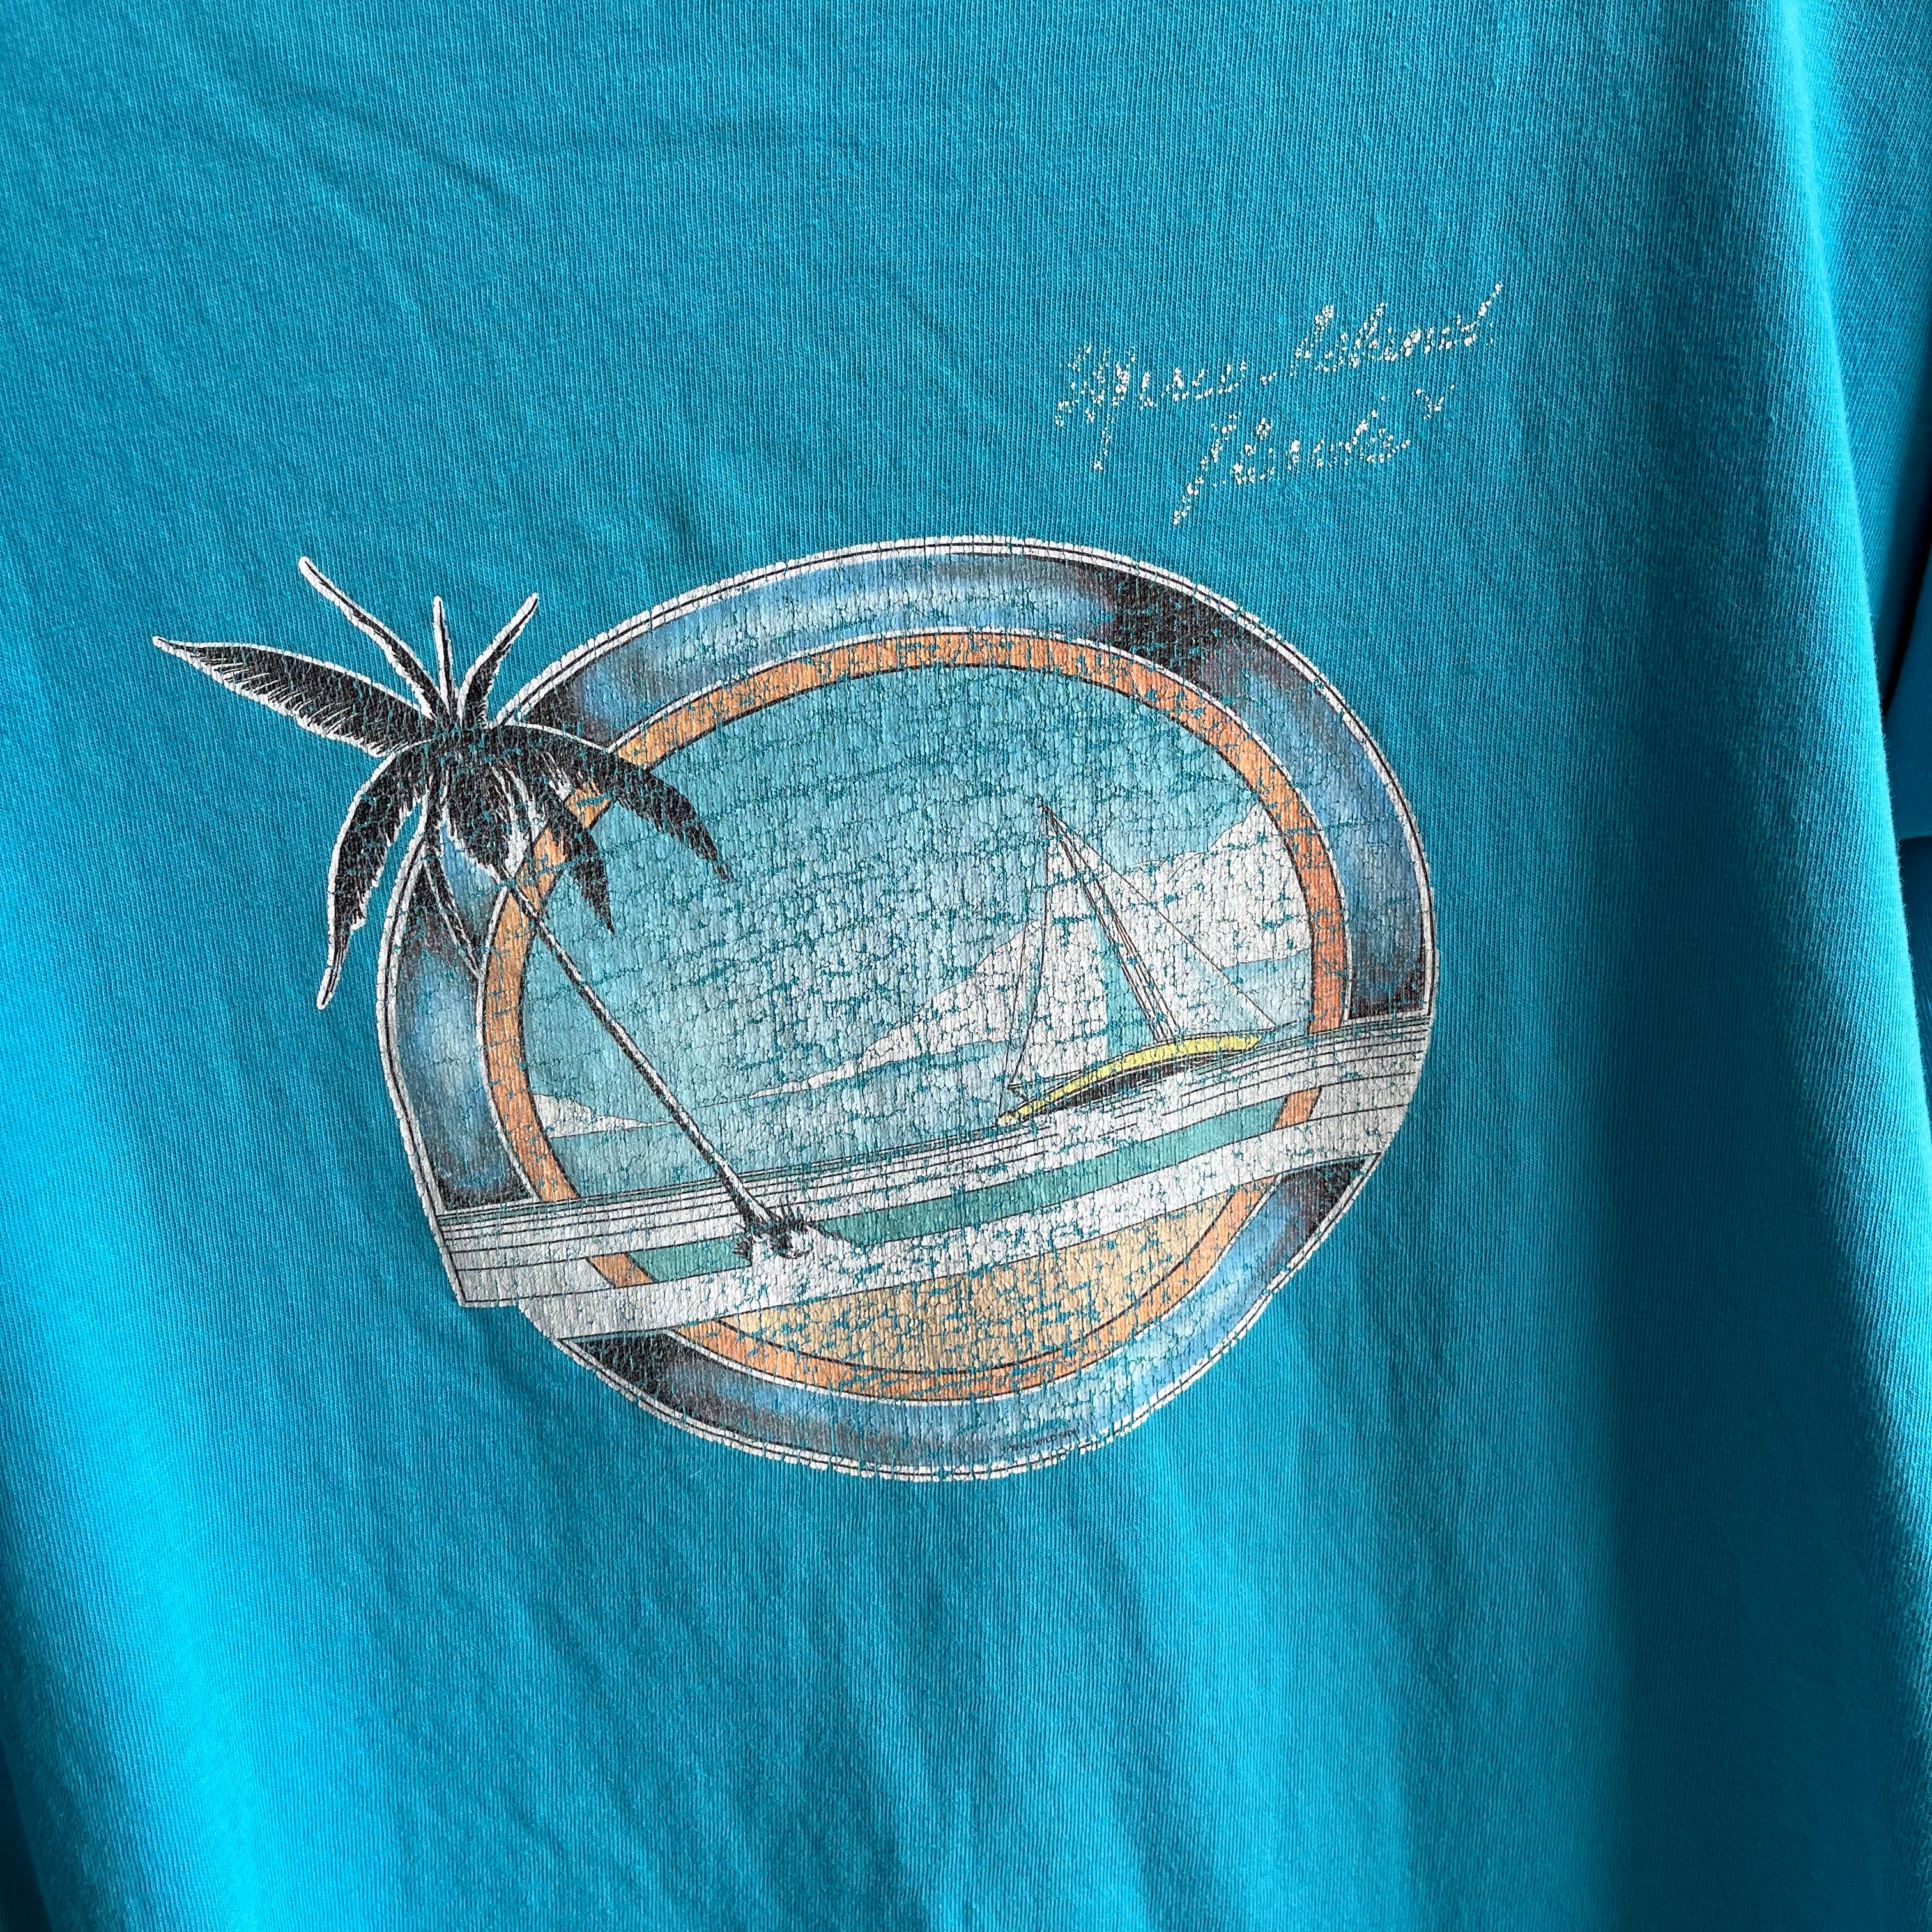 1980/90s Worn Out Marco Island Long Sleeve T-Shirt